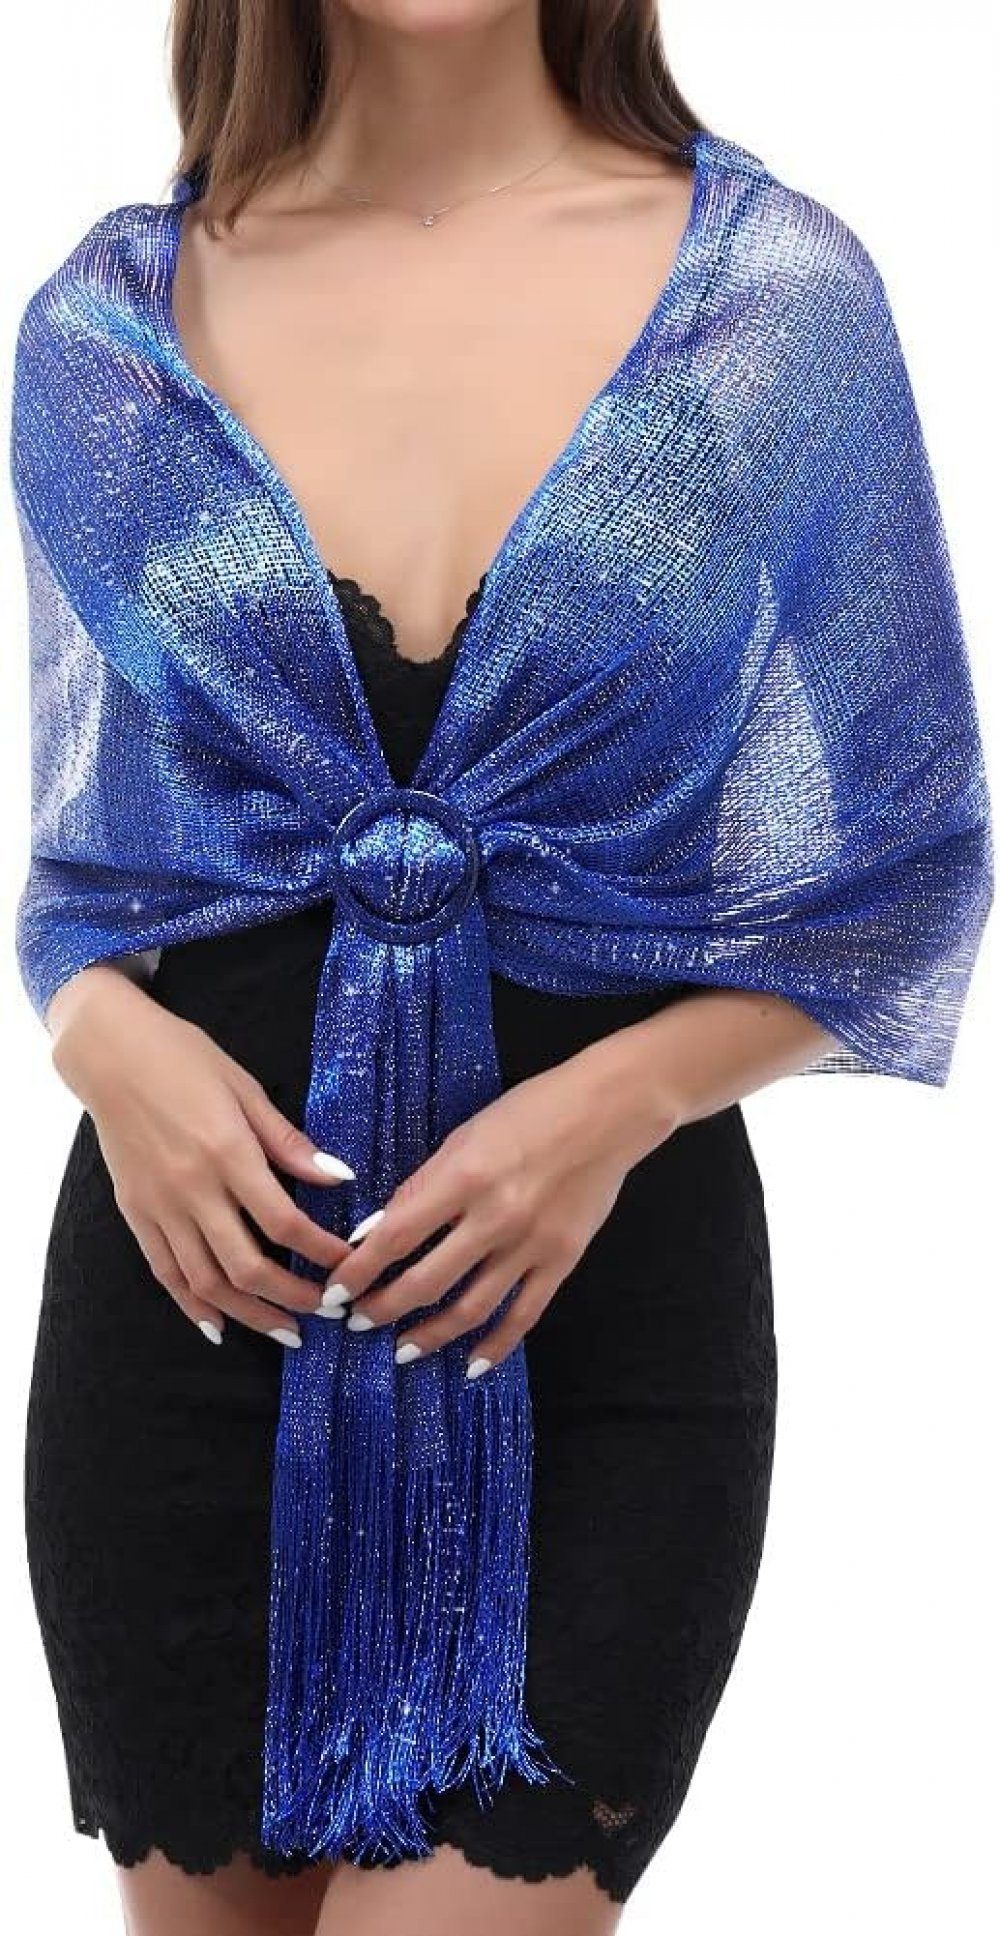 WaKuKa Schal Holiday metal buckle shawl suitable for sparkling evening parties BlauSilber